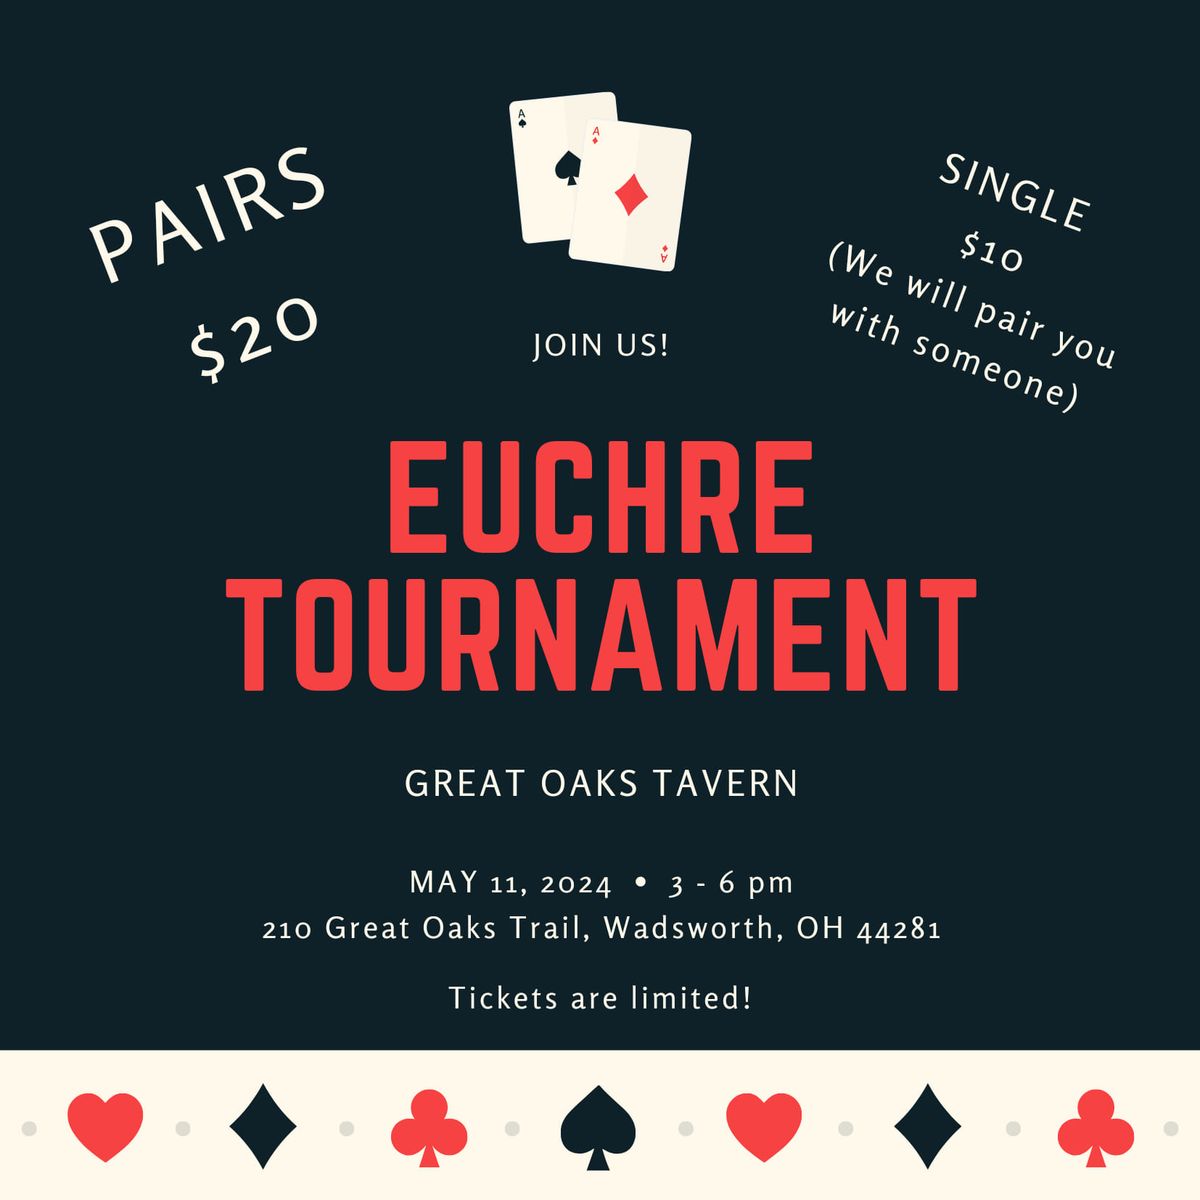 Euchre Tournament Co-Hosted with Great Oaks Tavern